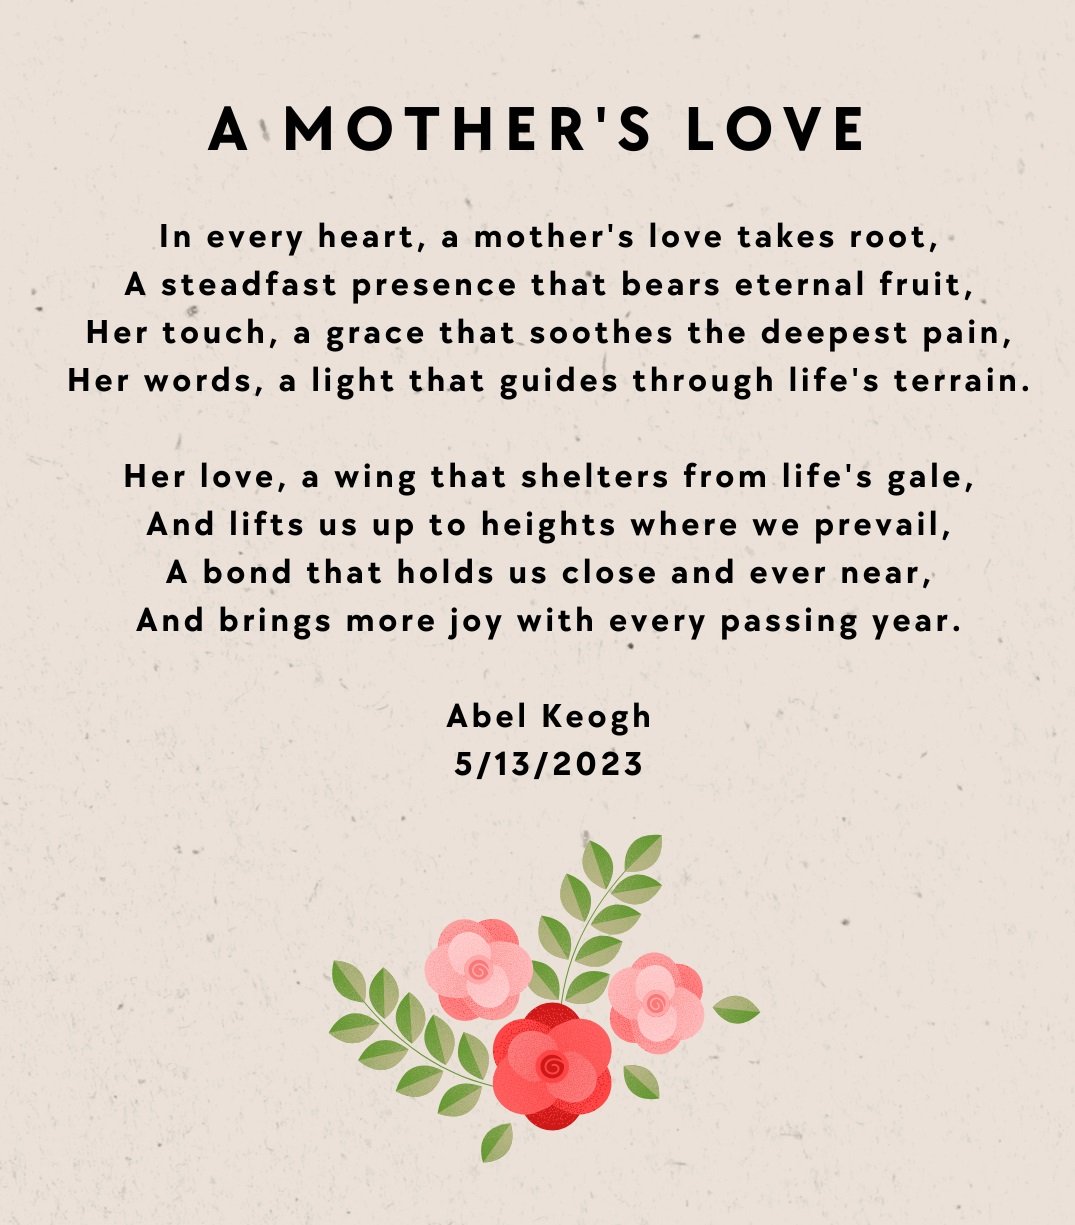 A Mother's Love: A Poem by Abel Keogh